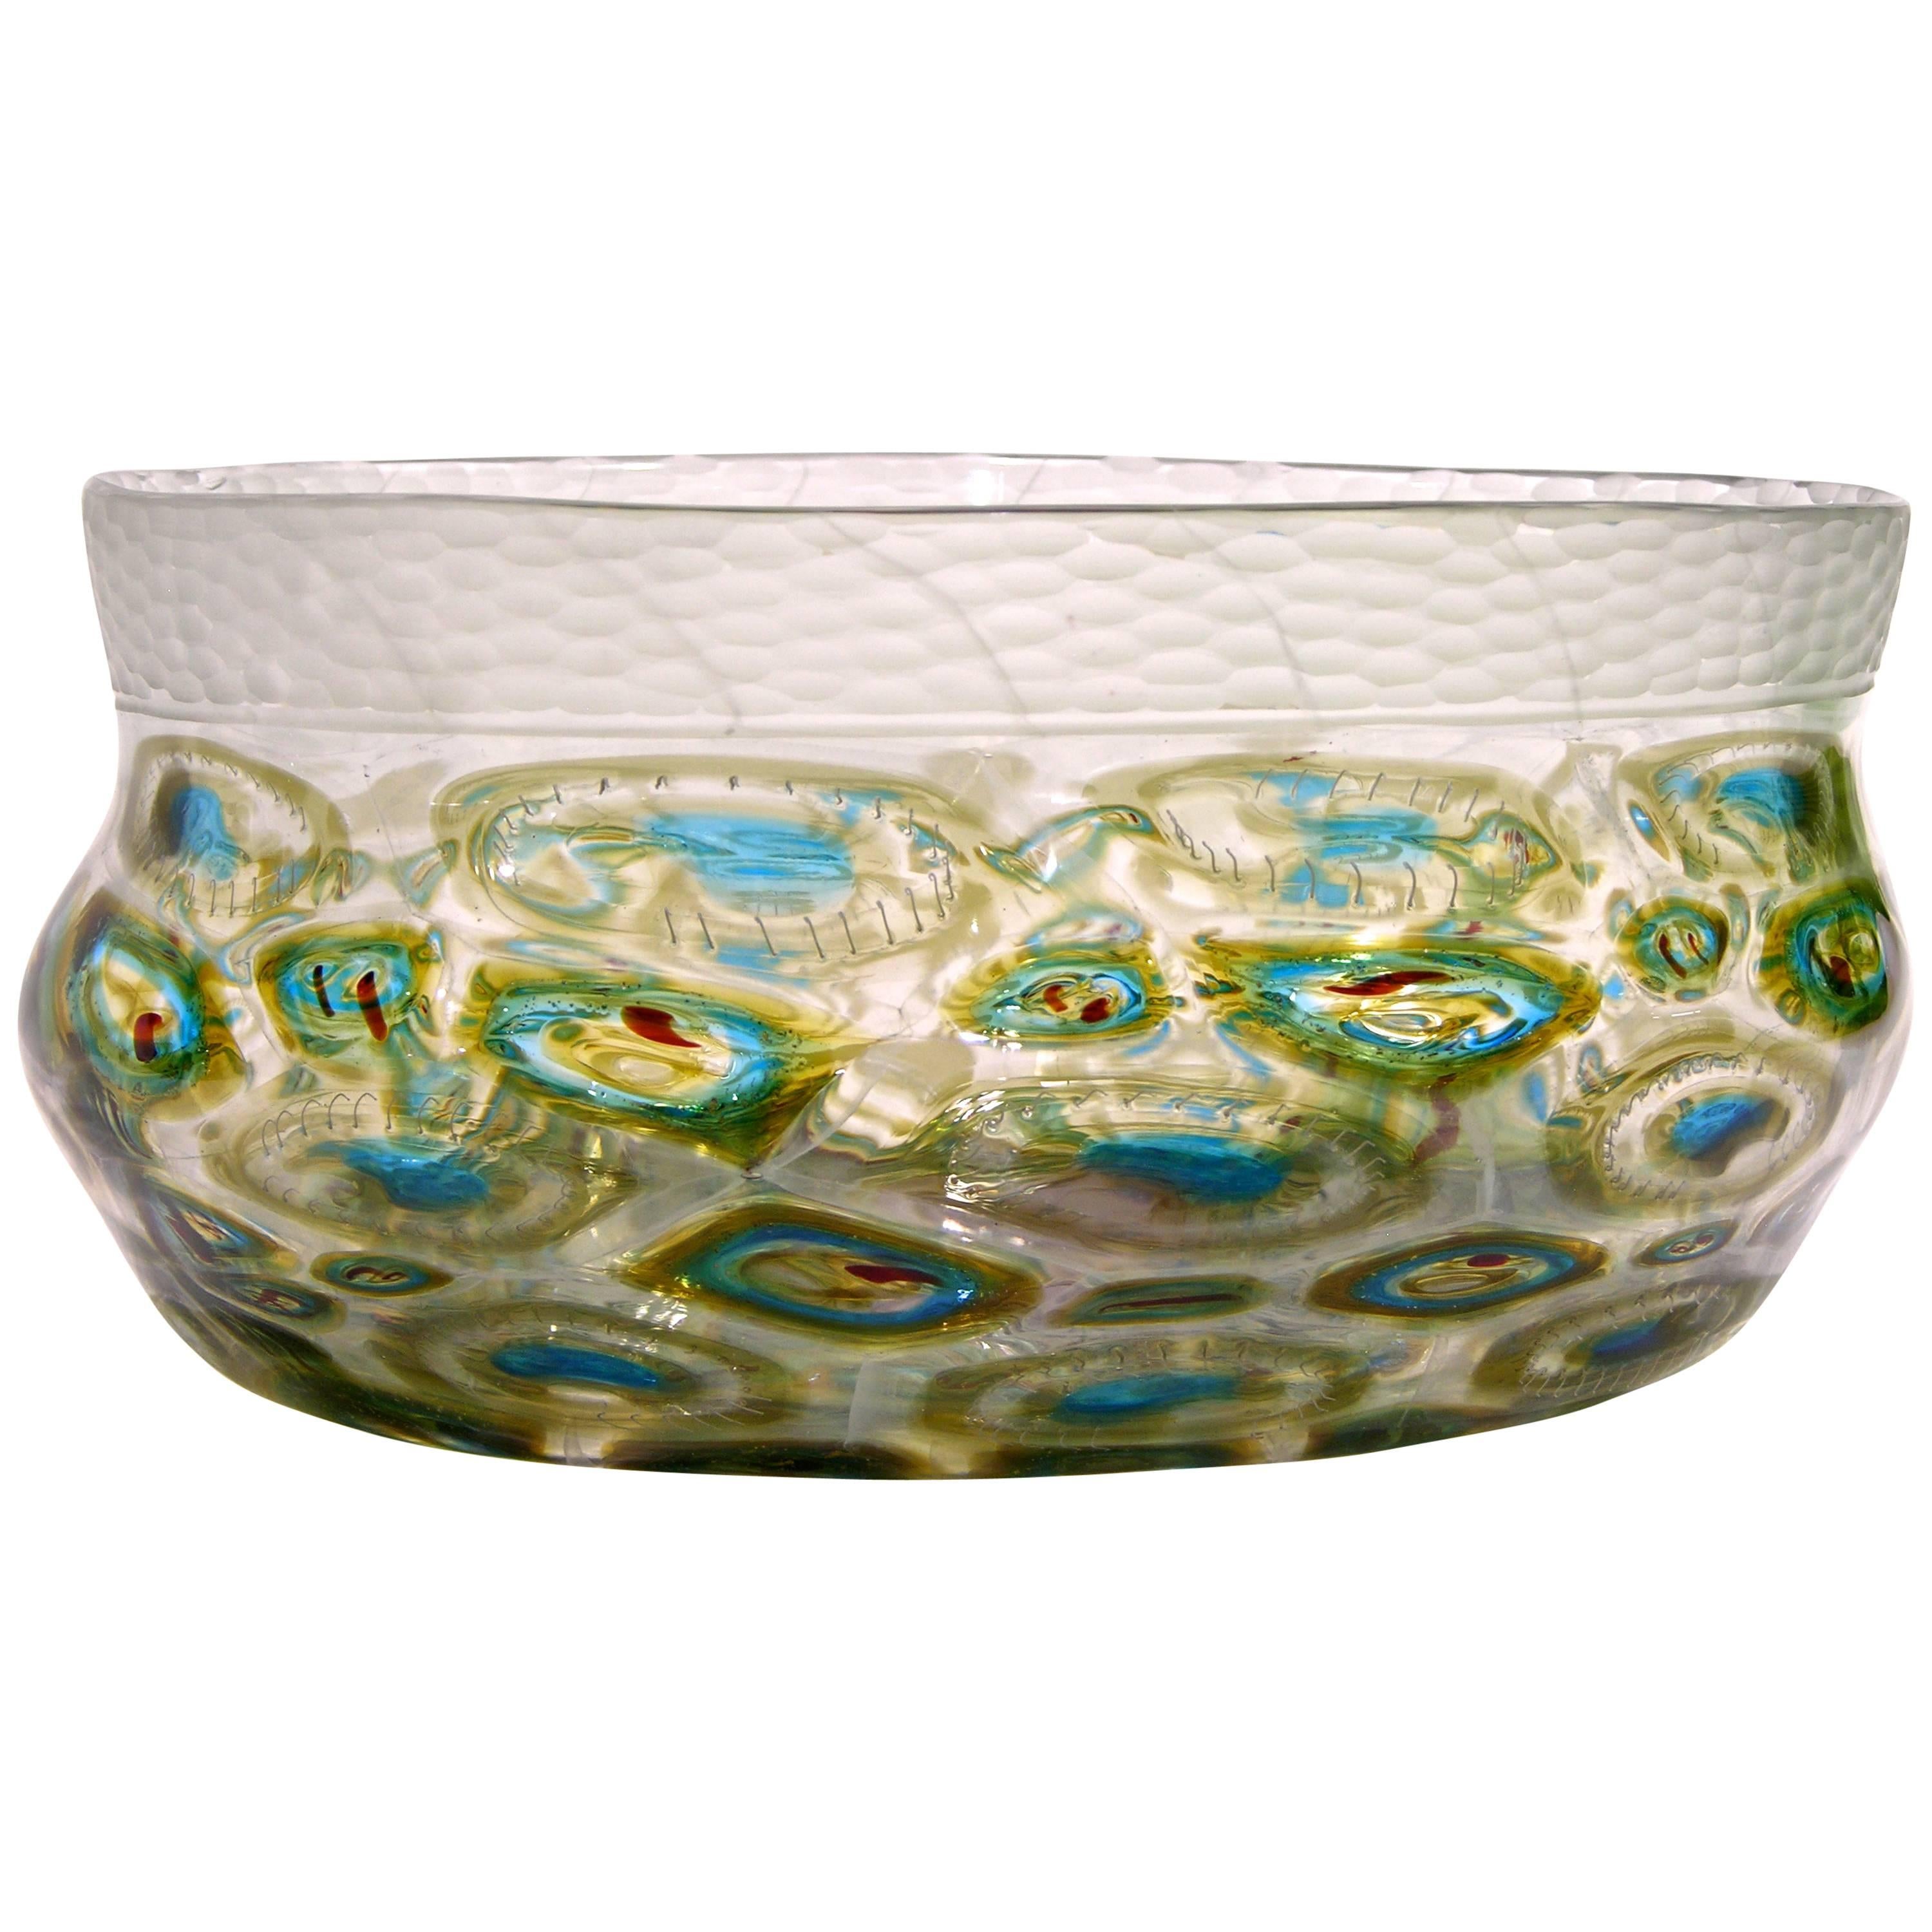 Afro Celotto Art Deco Design Glass Bowl with Peacock Murrine and Silver